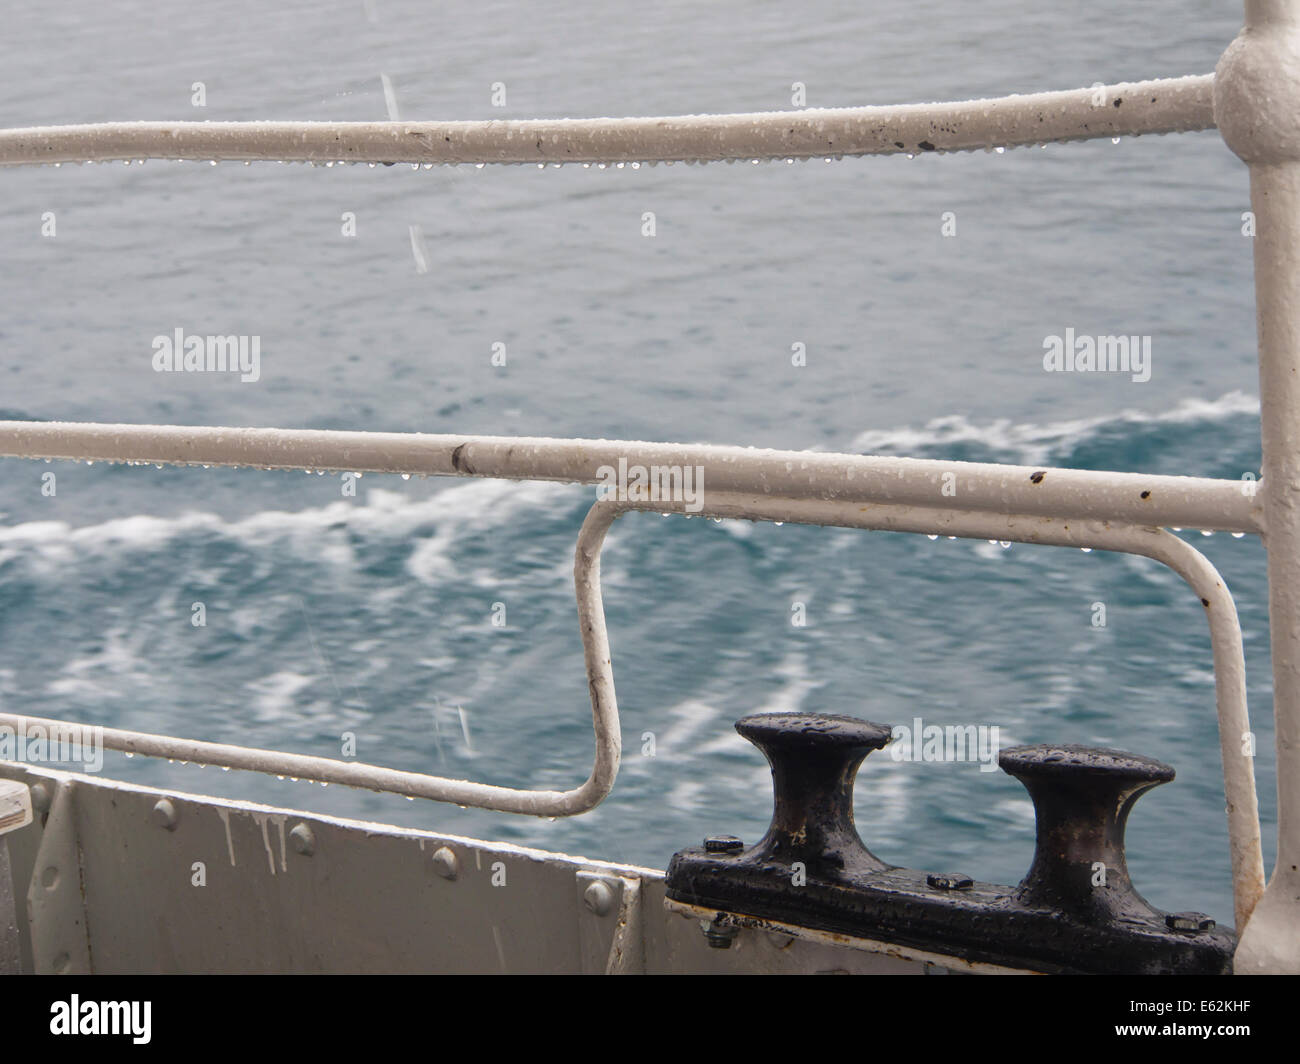 Close up of railing with bollards on a passenger boat crossing a Norwegian mountain lake in rain Stock Photo